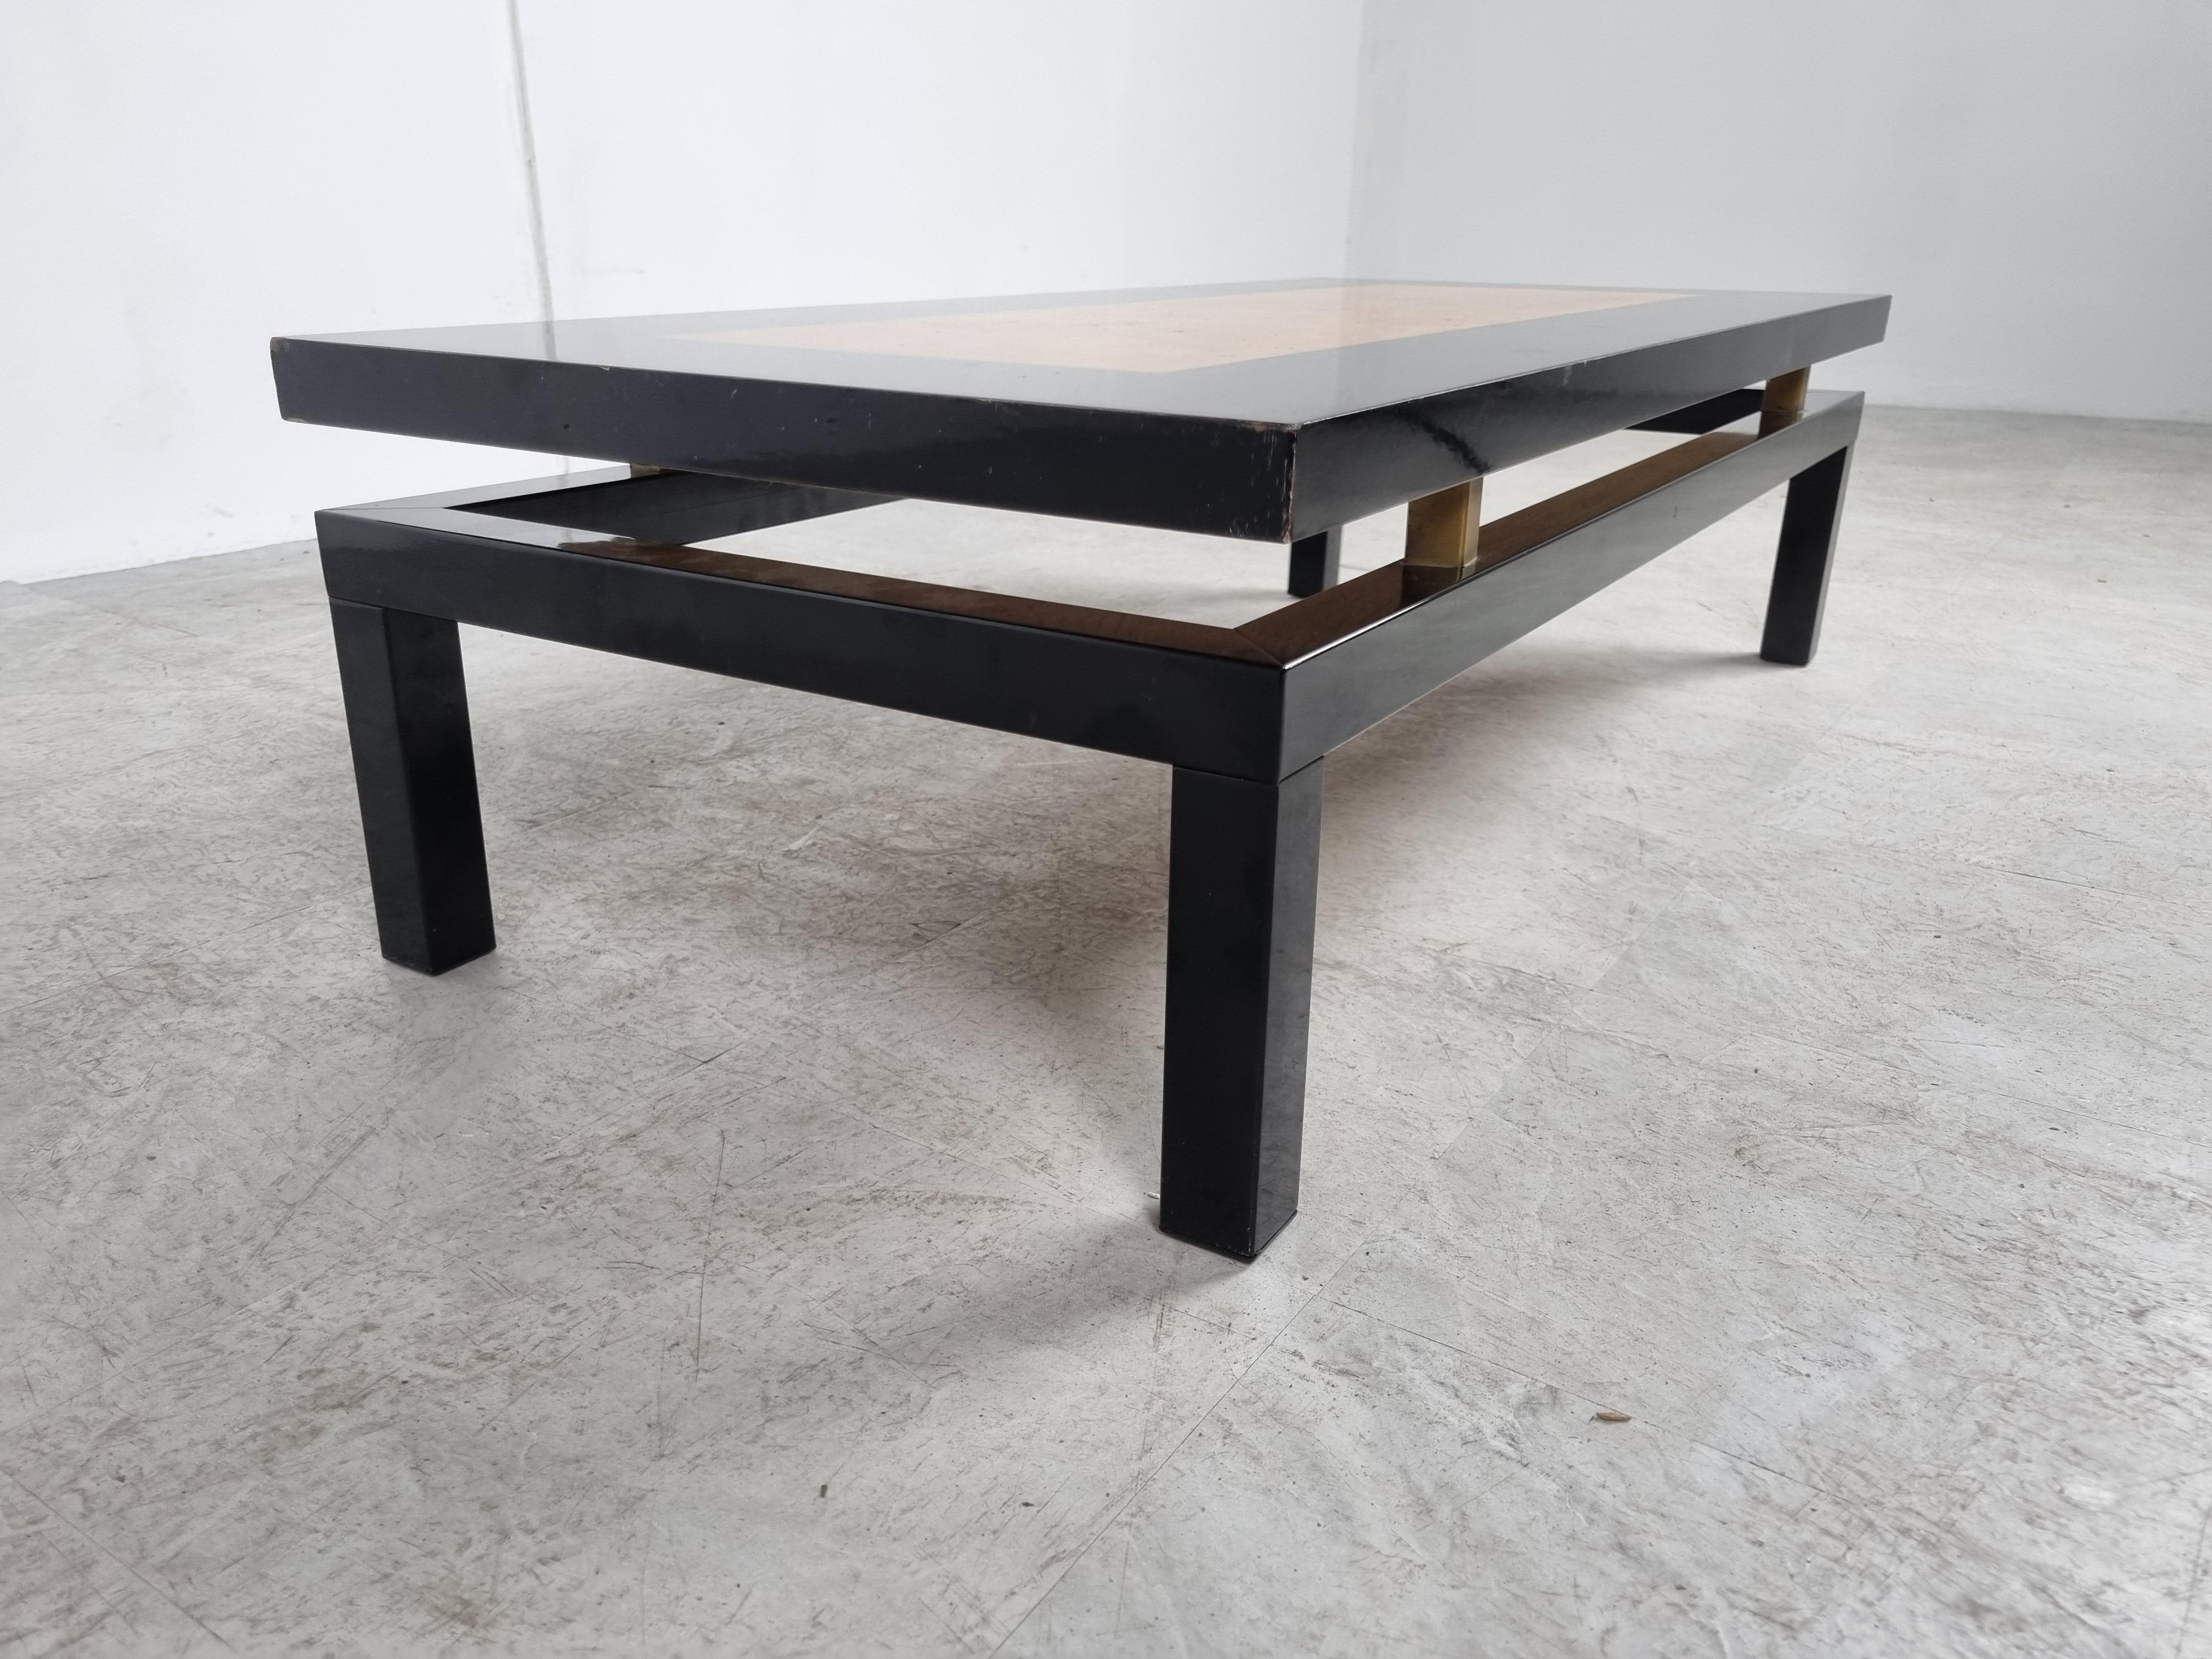 Luxurious looking coffee table with a black lacquered wood frame with an inserted burl wood top and brass.

The table is in the style of Guy Lefevre's design.

Good looking high quality coffee table from the seventies glam period.

1970s -